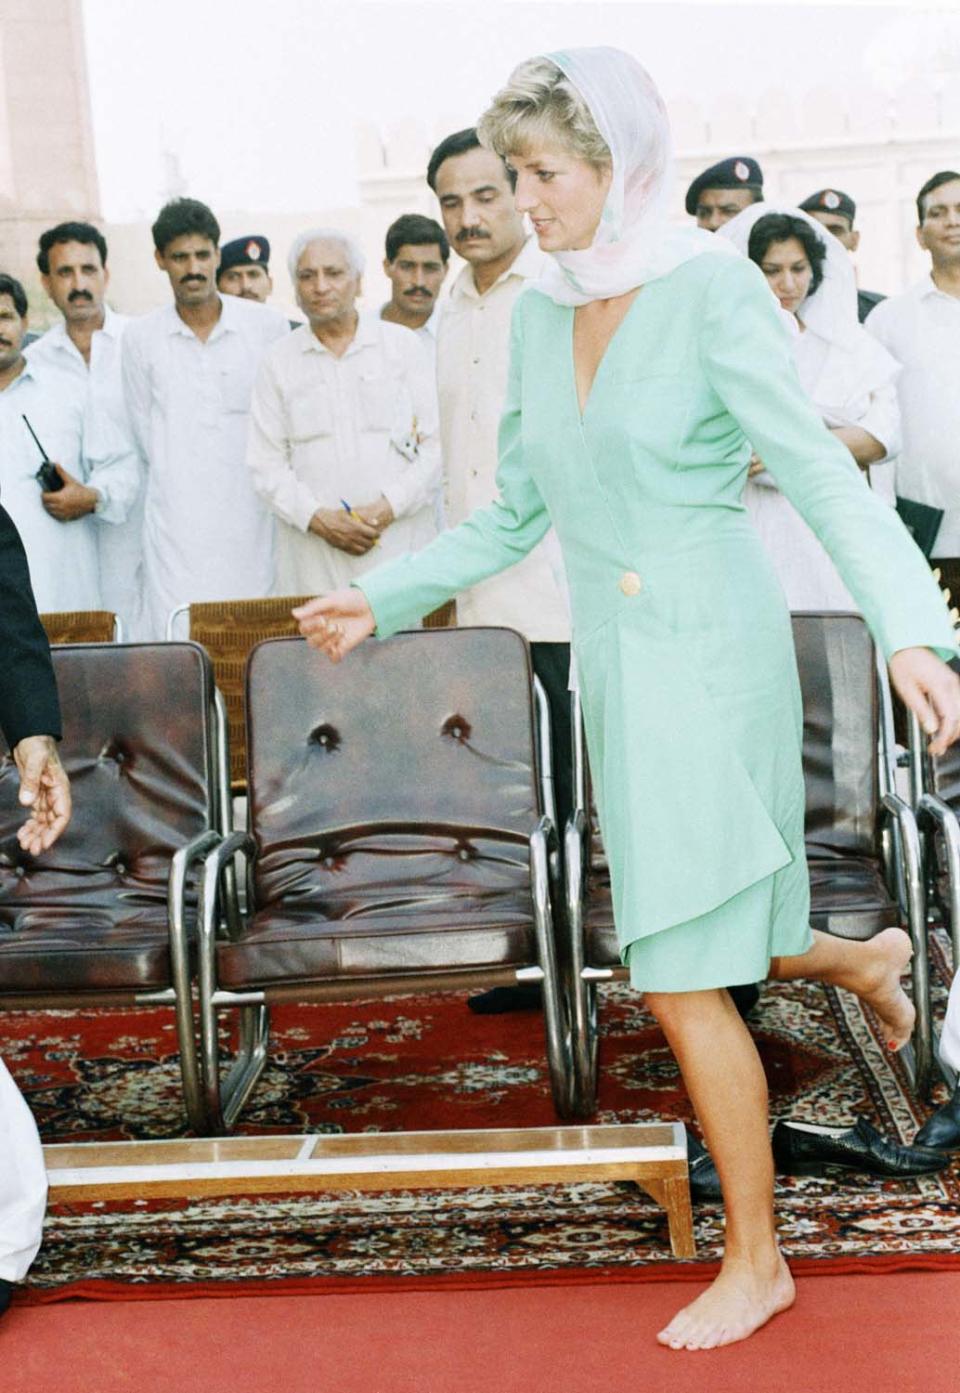 A barefoot Princess Diana enters the historical Badshahi Mosque in Lahore, Pakistan, on Wednesday, Sept. 25, 1991, which was built by Moghul emperors. It is a custom of the Muslim religion that shoes are not worn in places of worship. (AP Photo/Zahid)